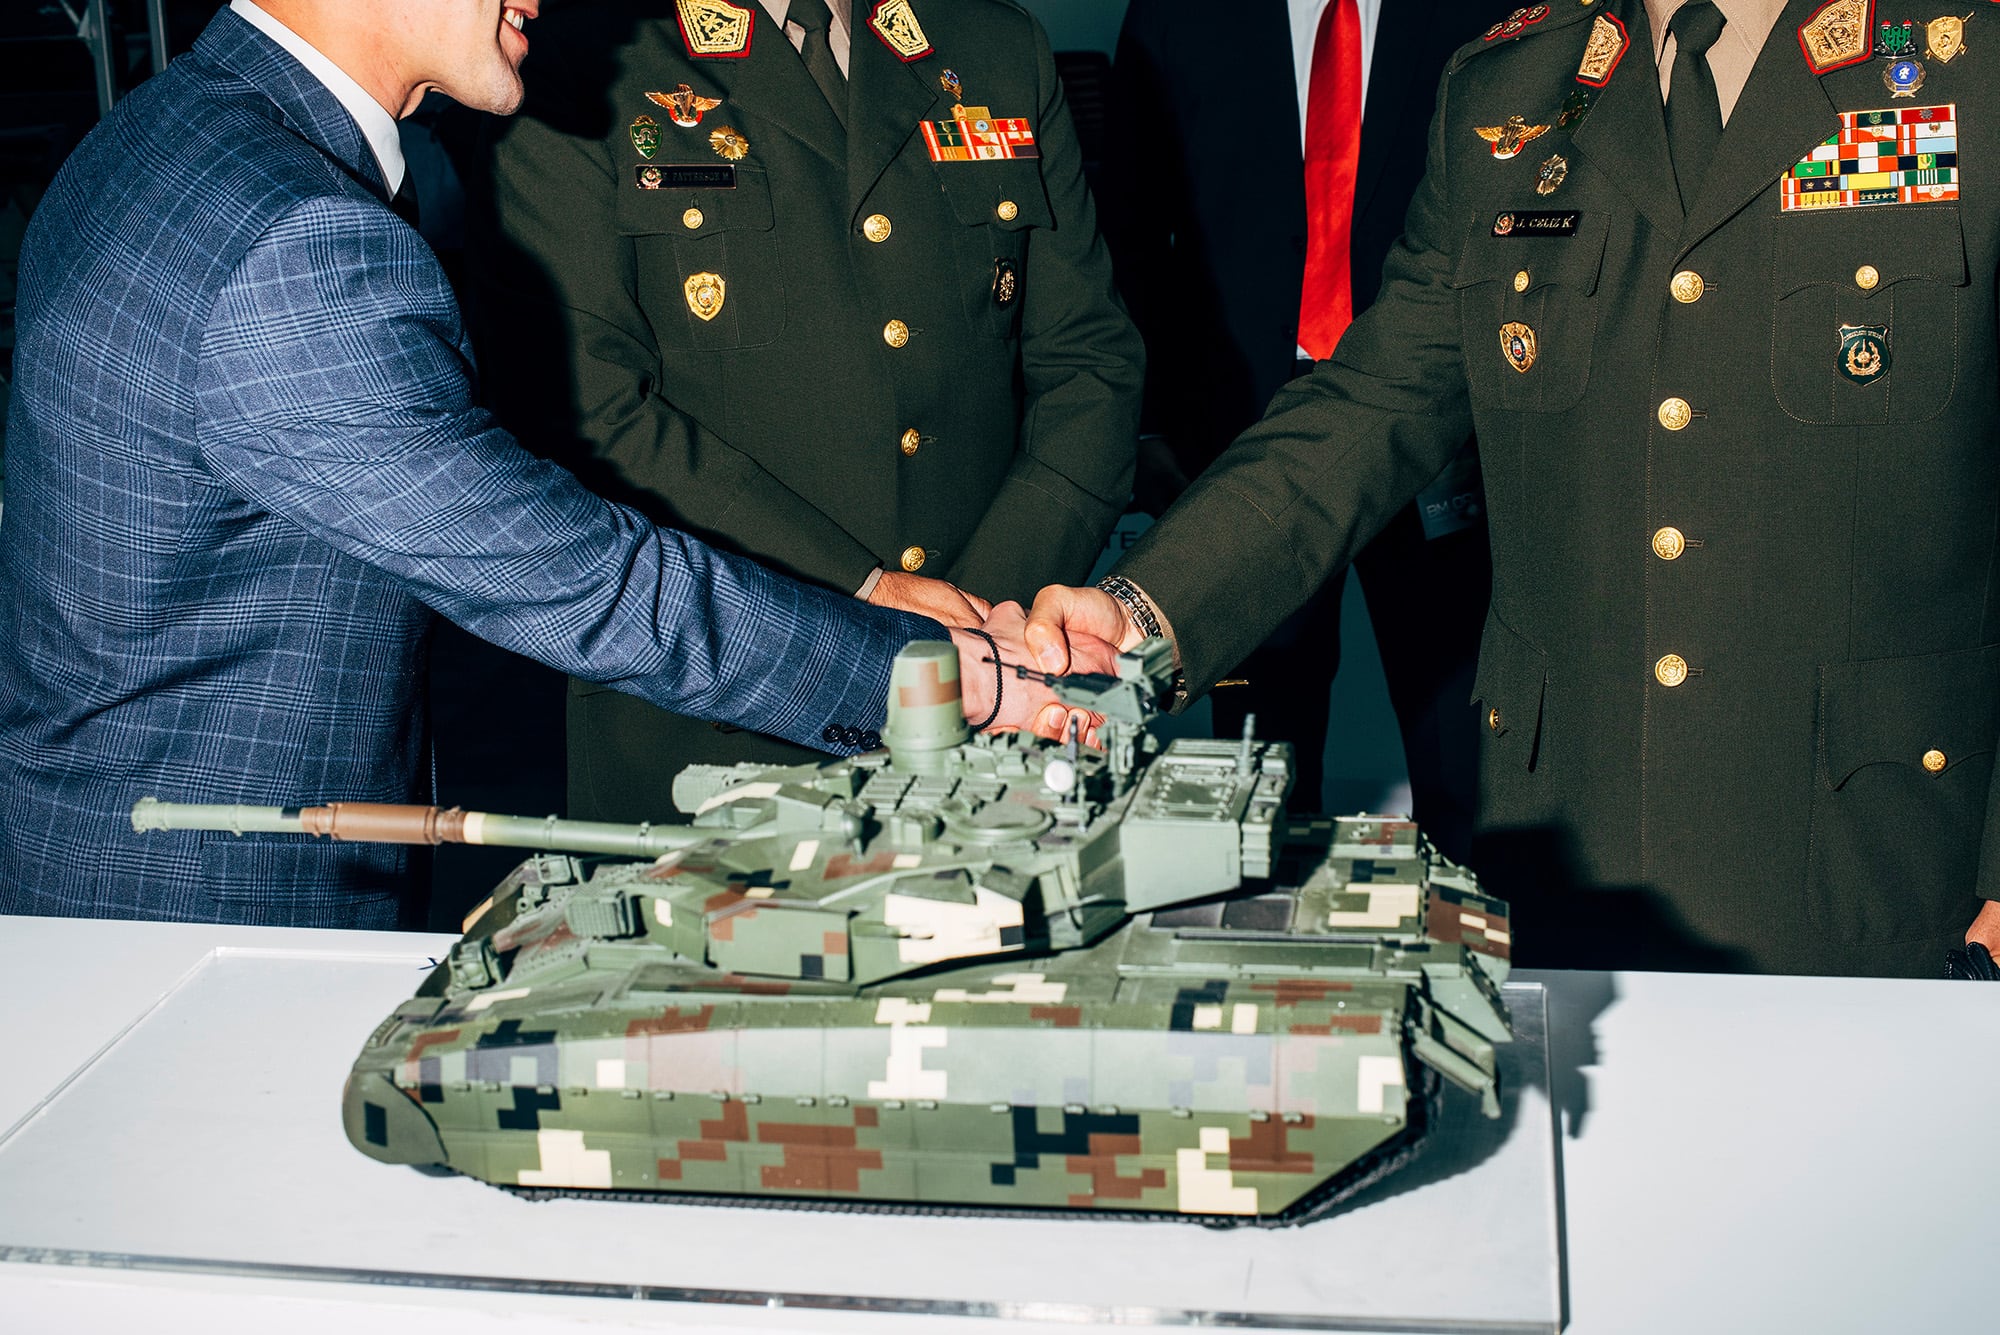 Peruvian delegation at the stand of Ukroboronprom. The Oplot-M main battle tank was offered during the expo as a potential solution to replace the old Soviet T-55 MBT of the Peruvian army. SITDEF, Lima, Peru, 2019. 